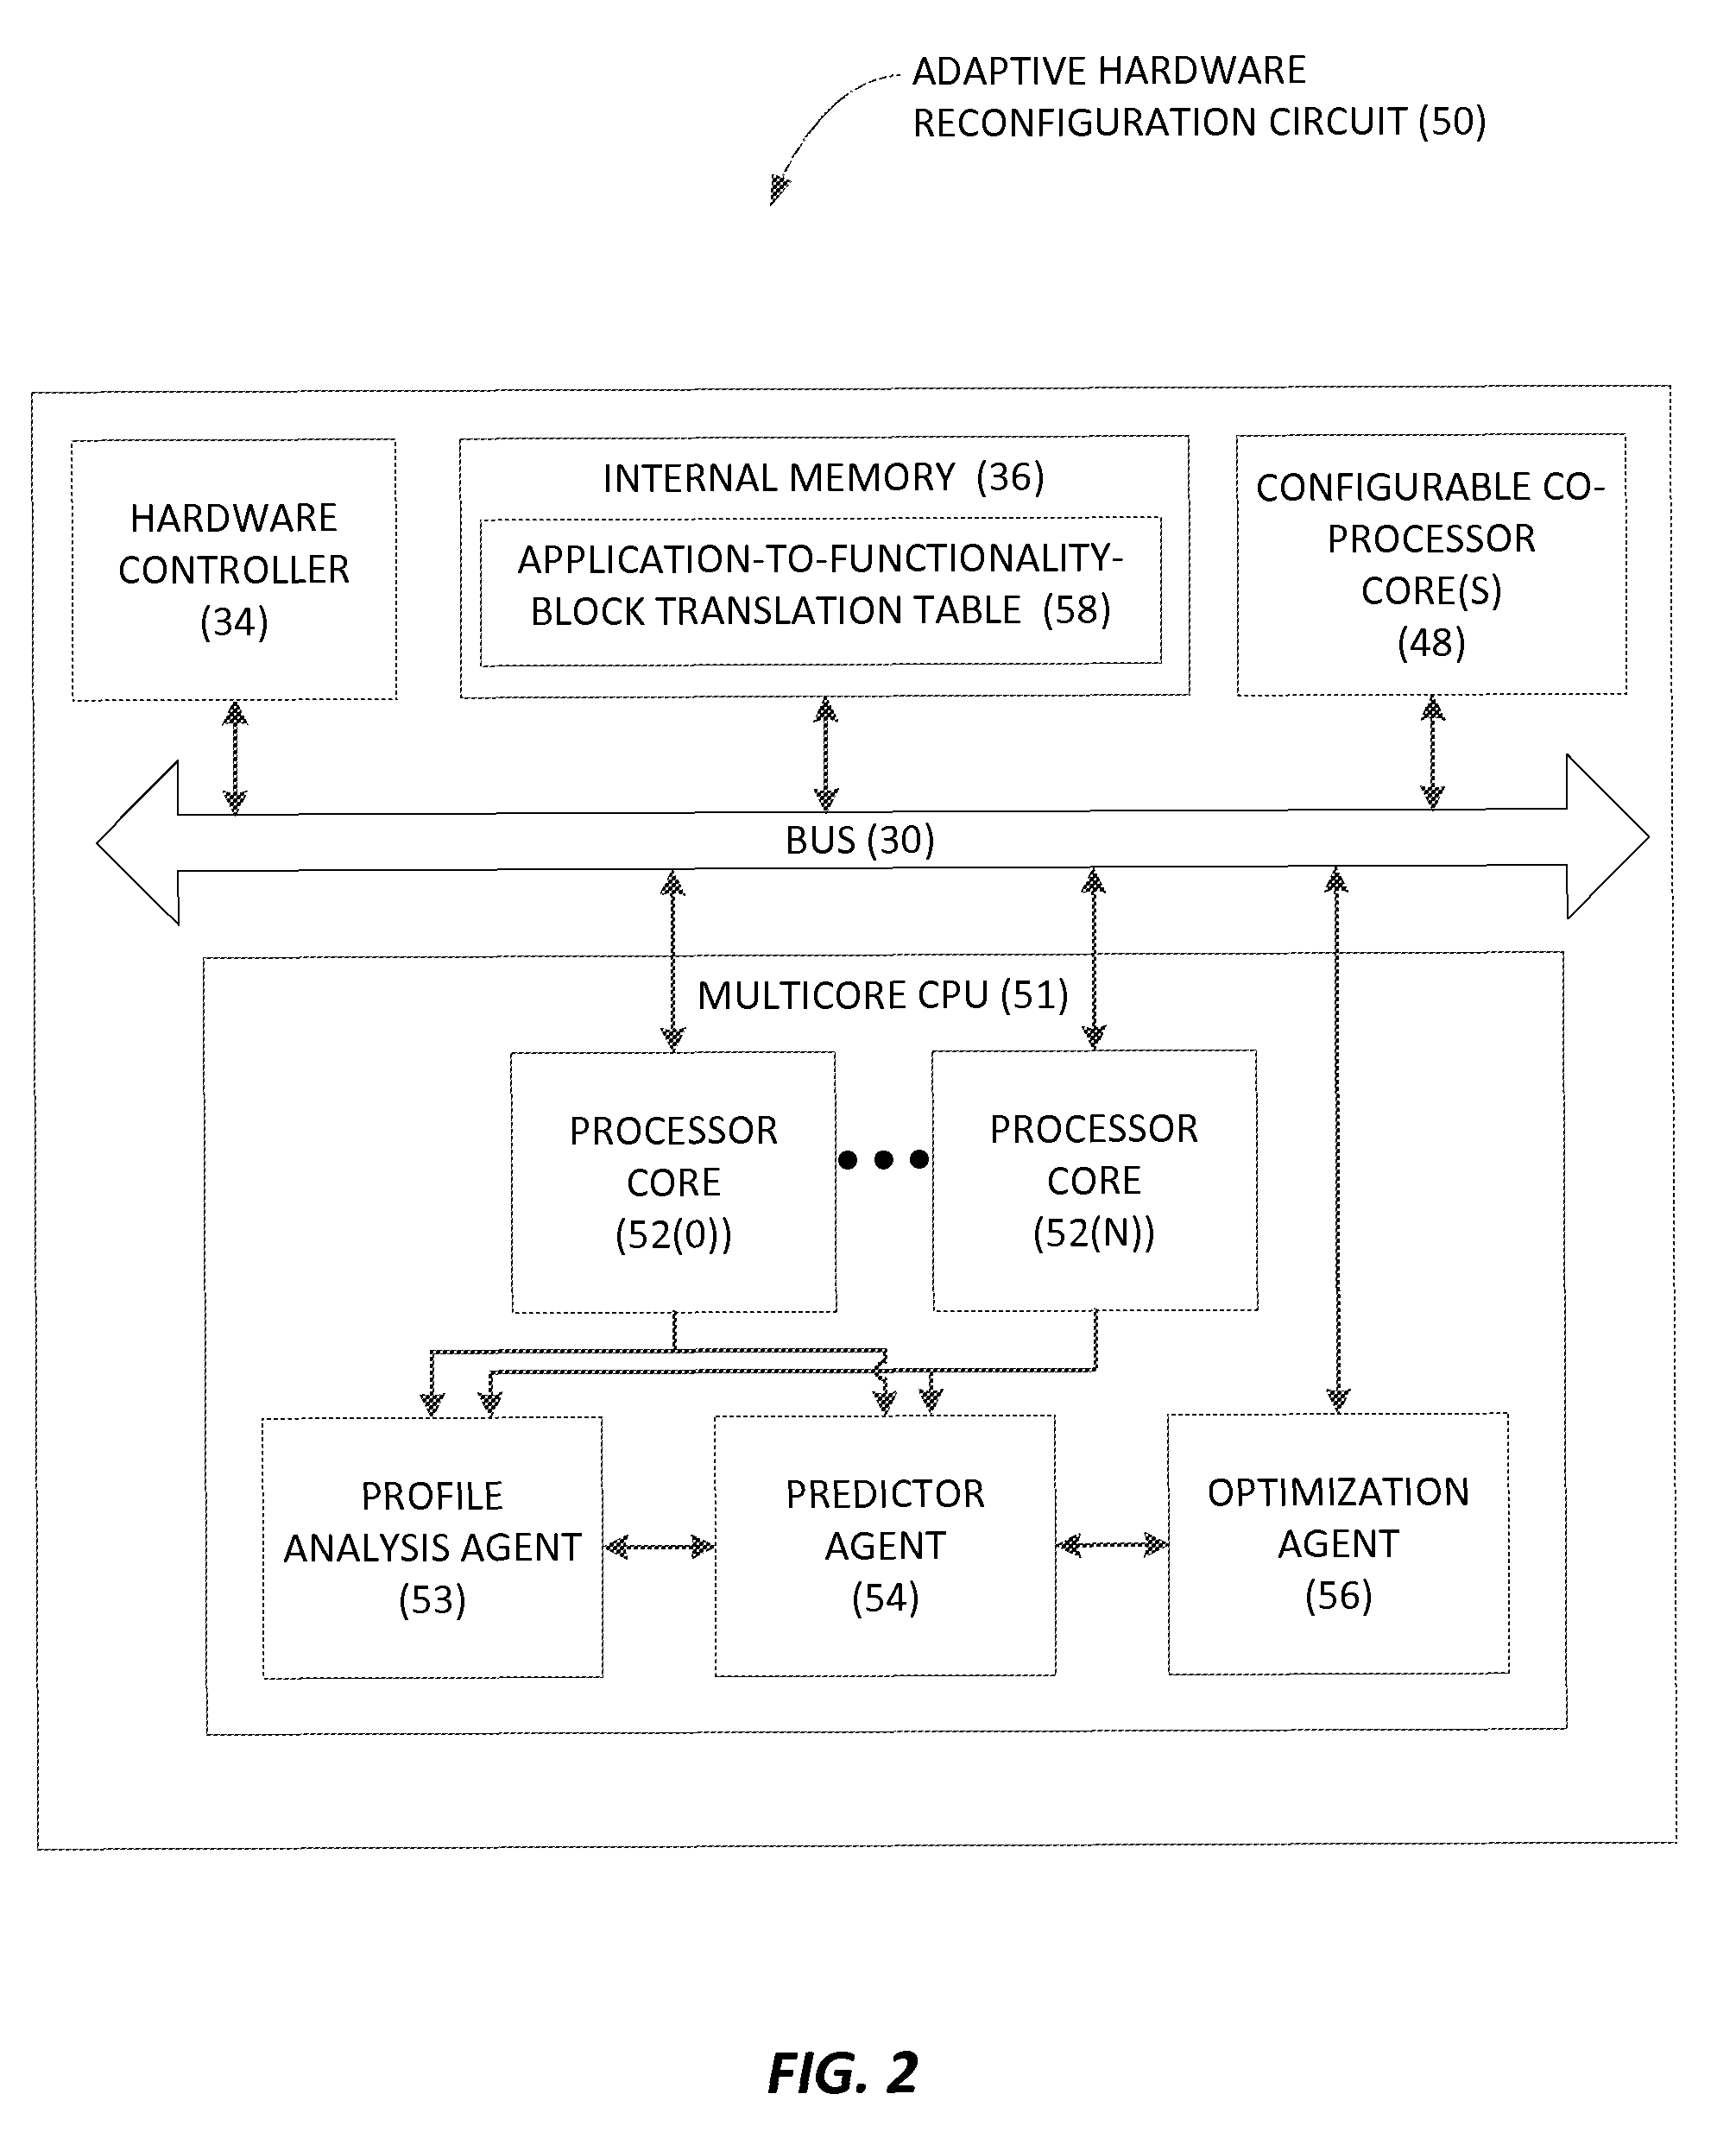 Adaptive hardware reconfiguration of configurable co-processor cores for hardware optimization of functionality blocks based on use case prediction, and related methods, circuits, and computer-readable media